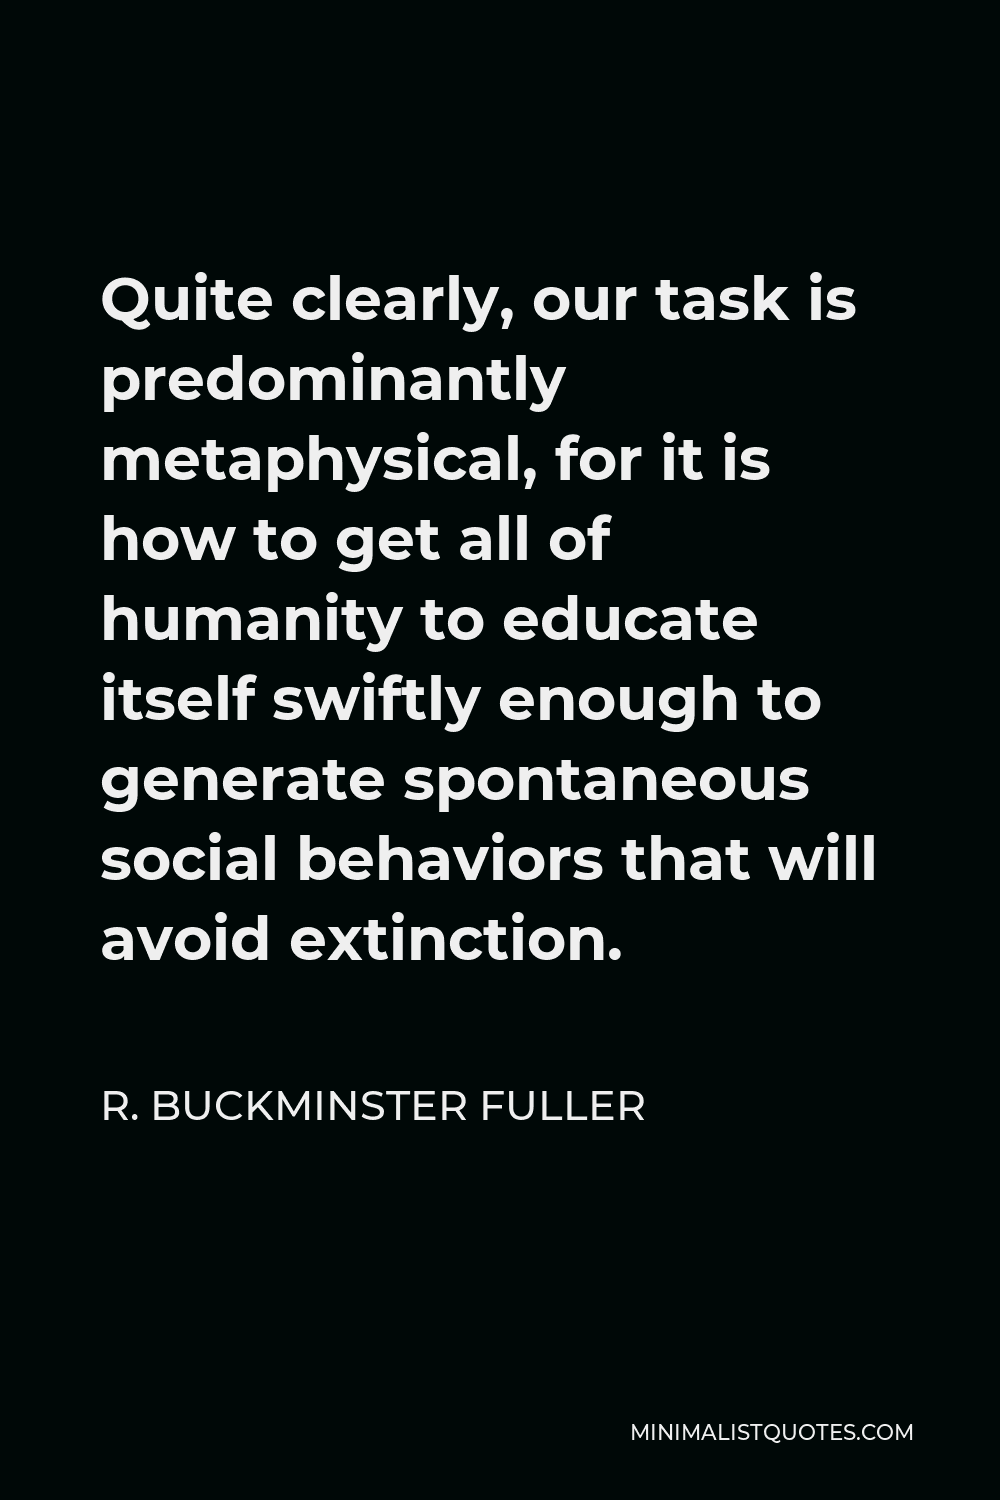 R. Buckminster Fuller Quote - Quite clearly, our task is predominantly metaphysical, for it is how to get all of humanity to educate itself swiftly enough to generate spontaneous social behaviors that will avoid extinction.